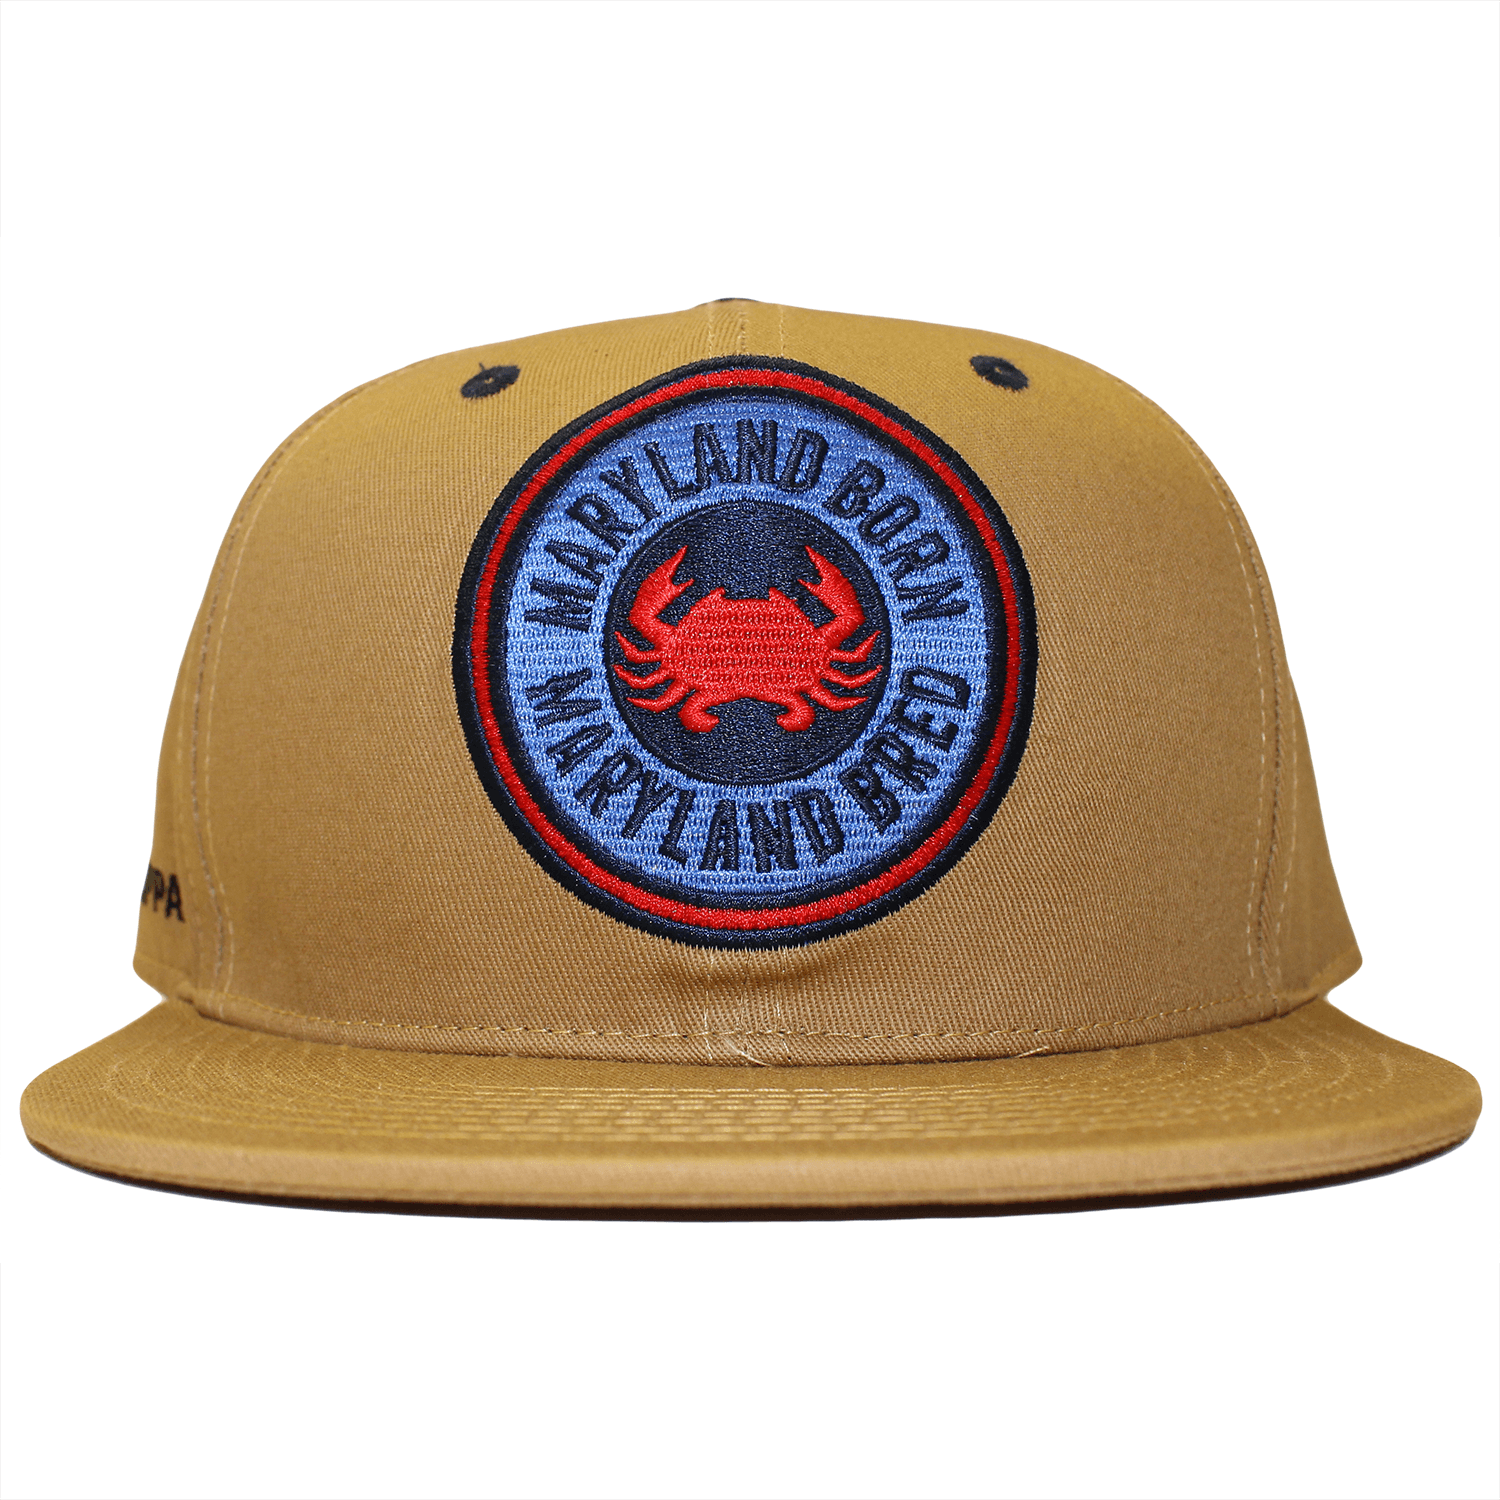 Maryland Born Maryland Bred (Tan) / Canvas Snapback Hat - Route One Apparel